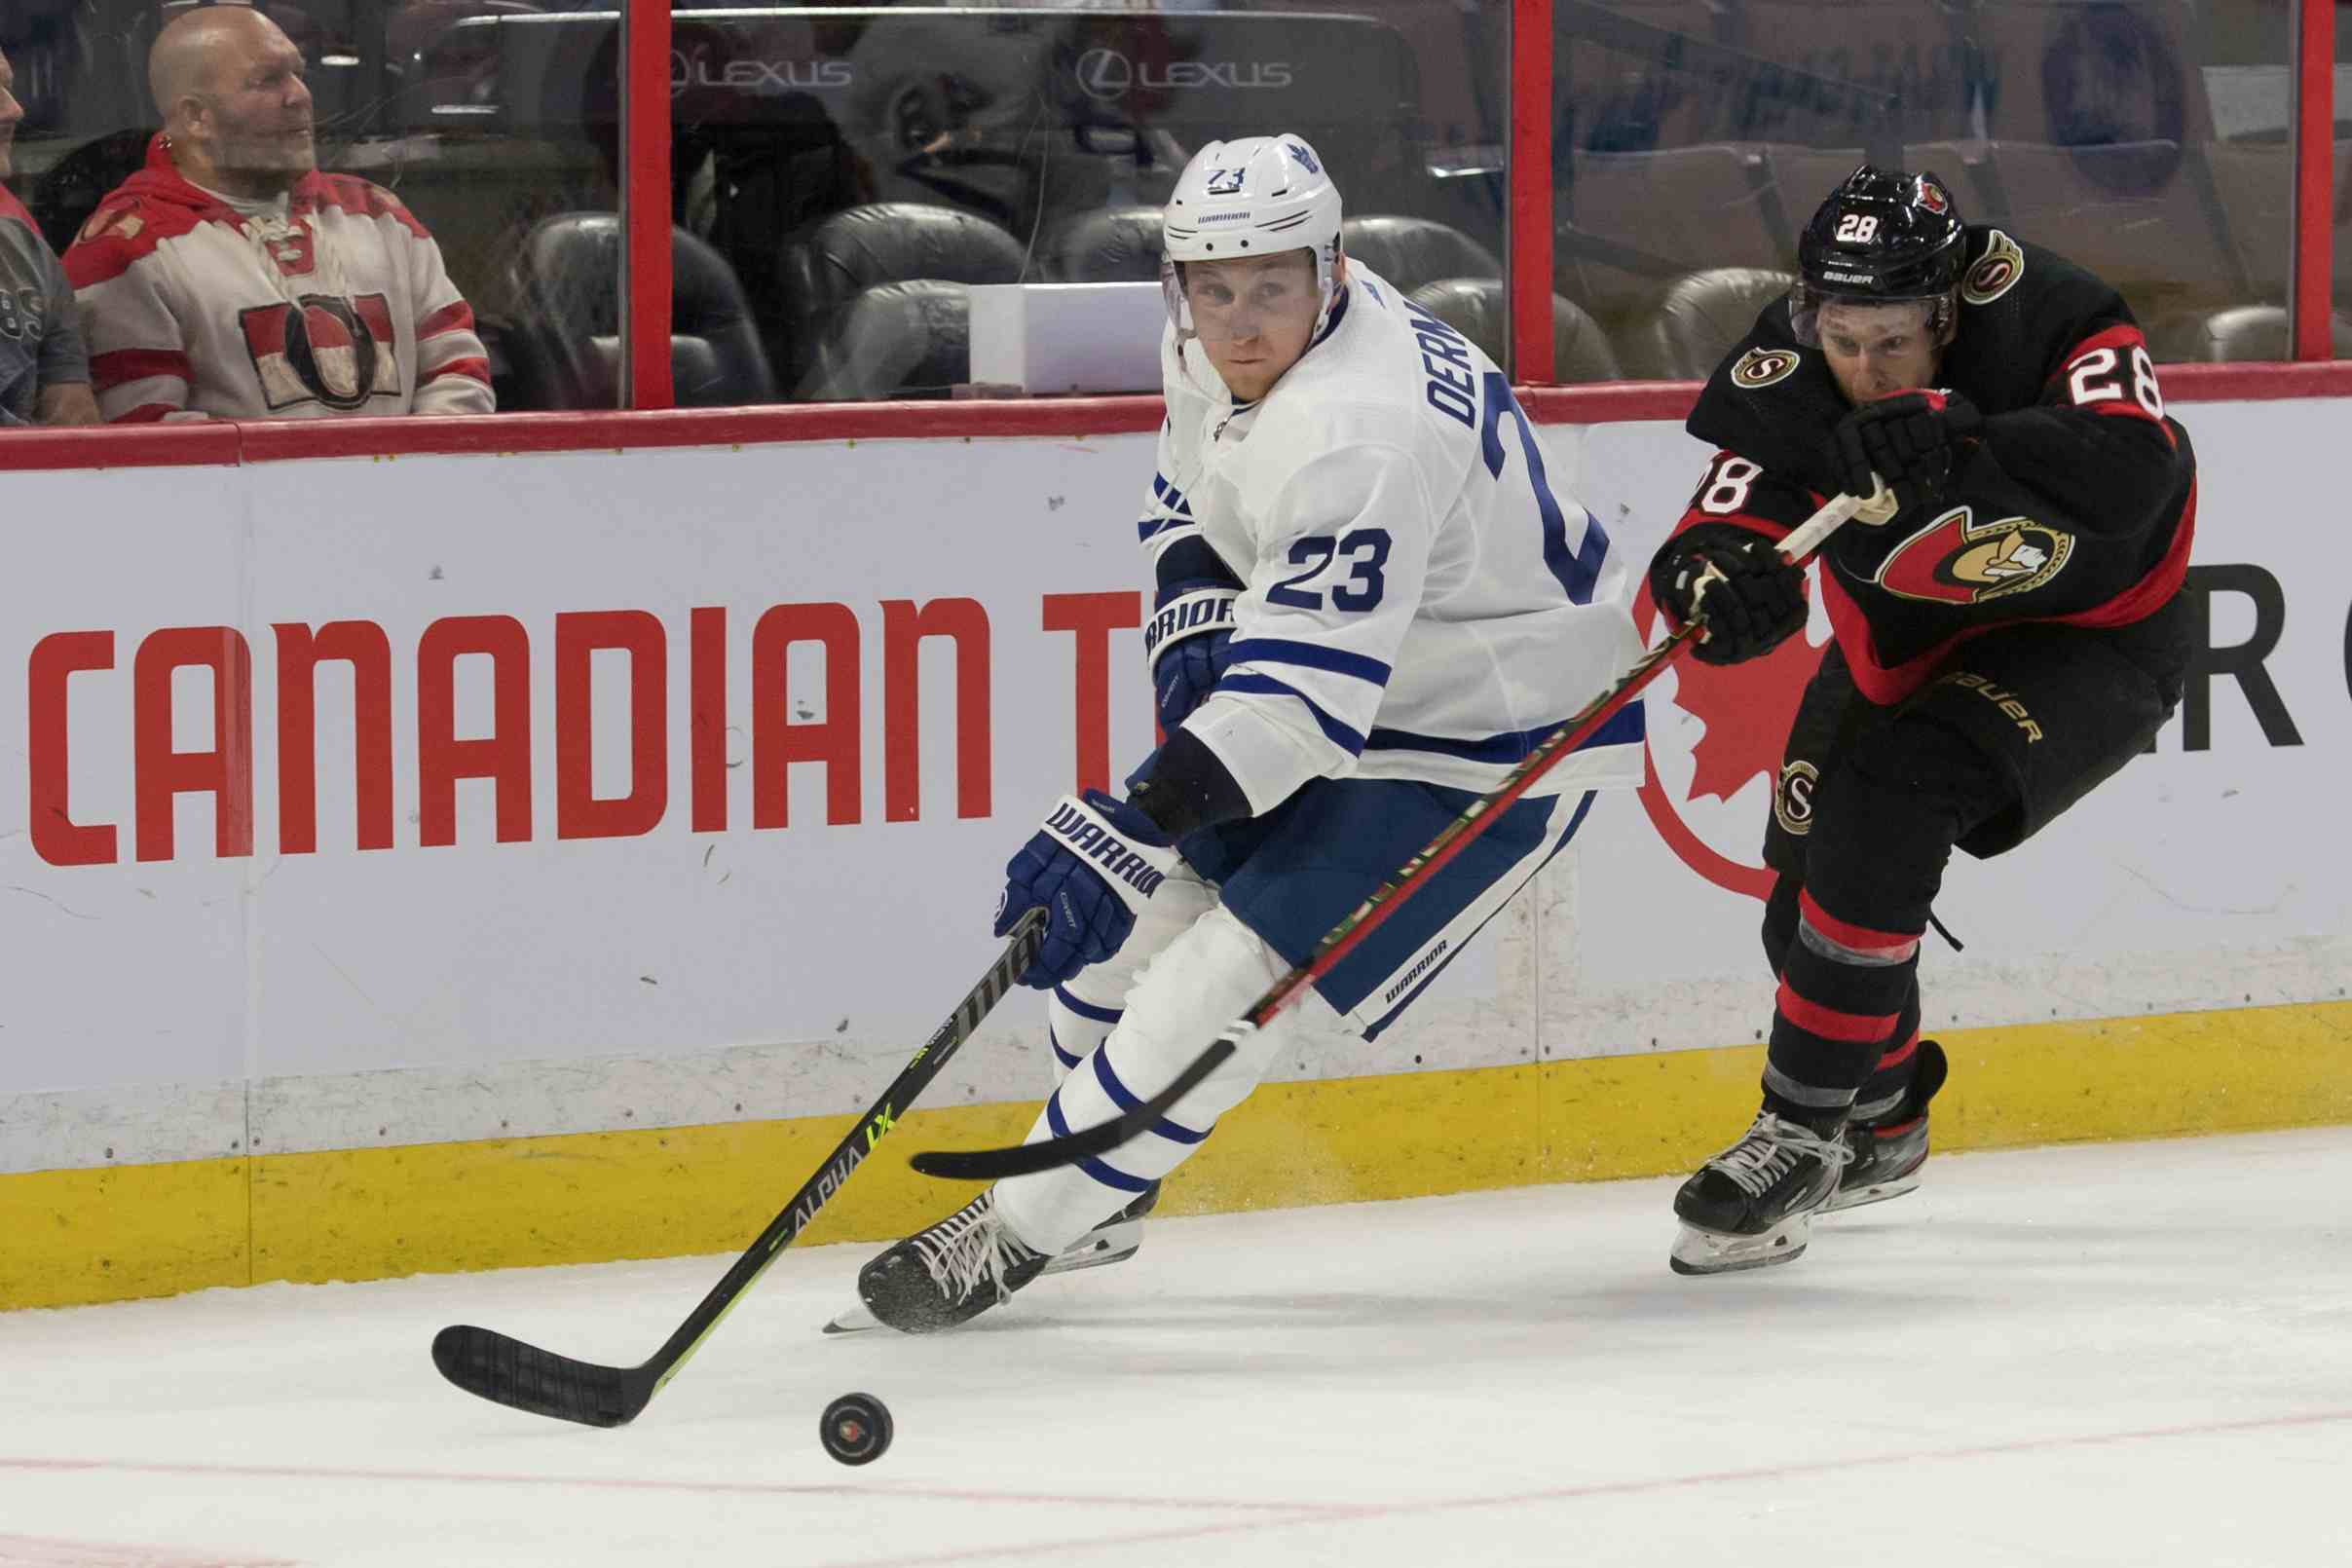 Leafs Travis Dermott and Senators Connor Brown battle for puck in game at Canadian Tire Centre